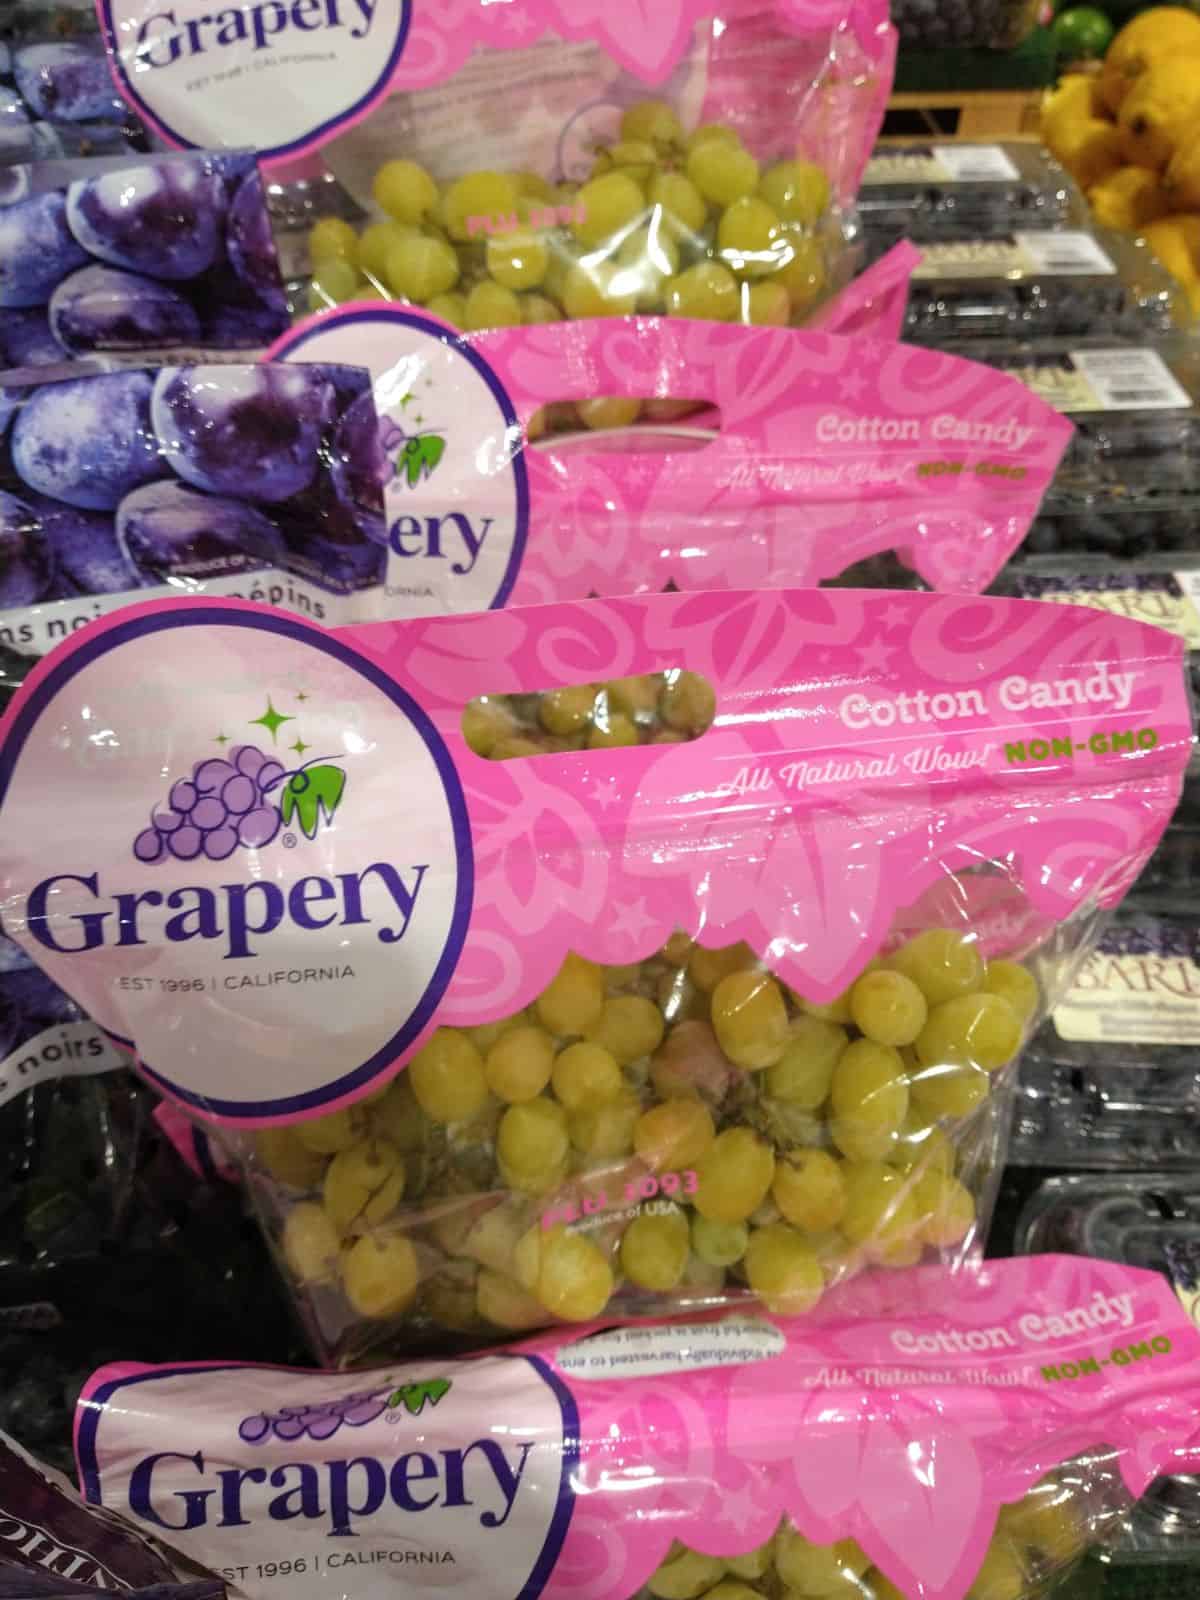 Bags of Cotton Candy grapes at a store.